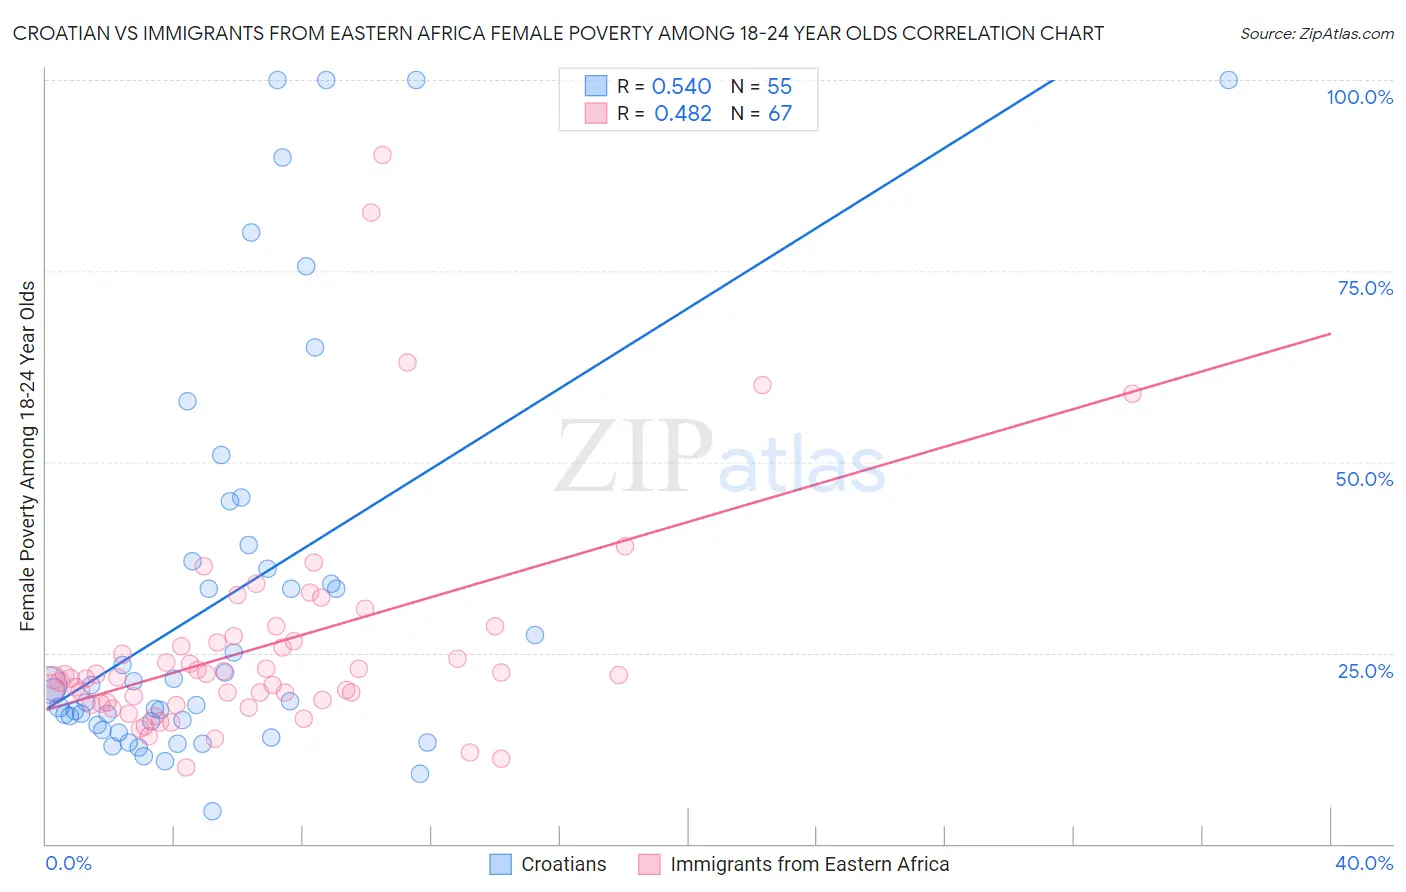 Croatian vs Immigrants from Eastern Africa Female Poverty Among 18-24 Year Olds